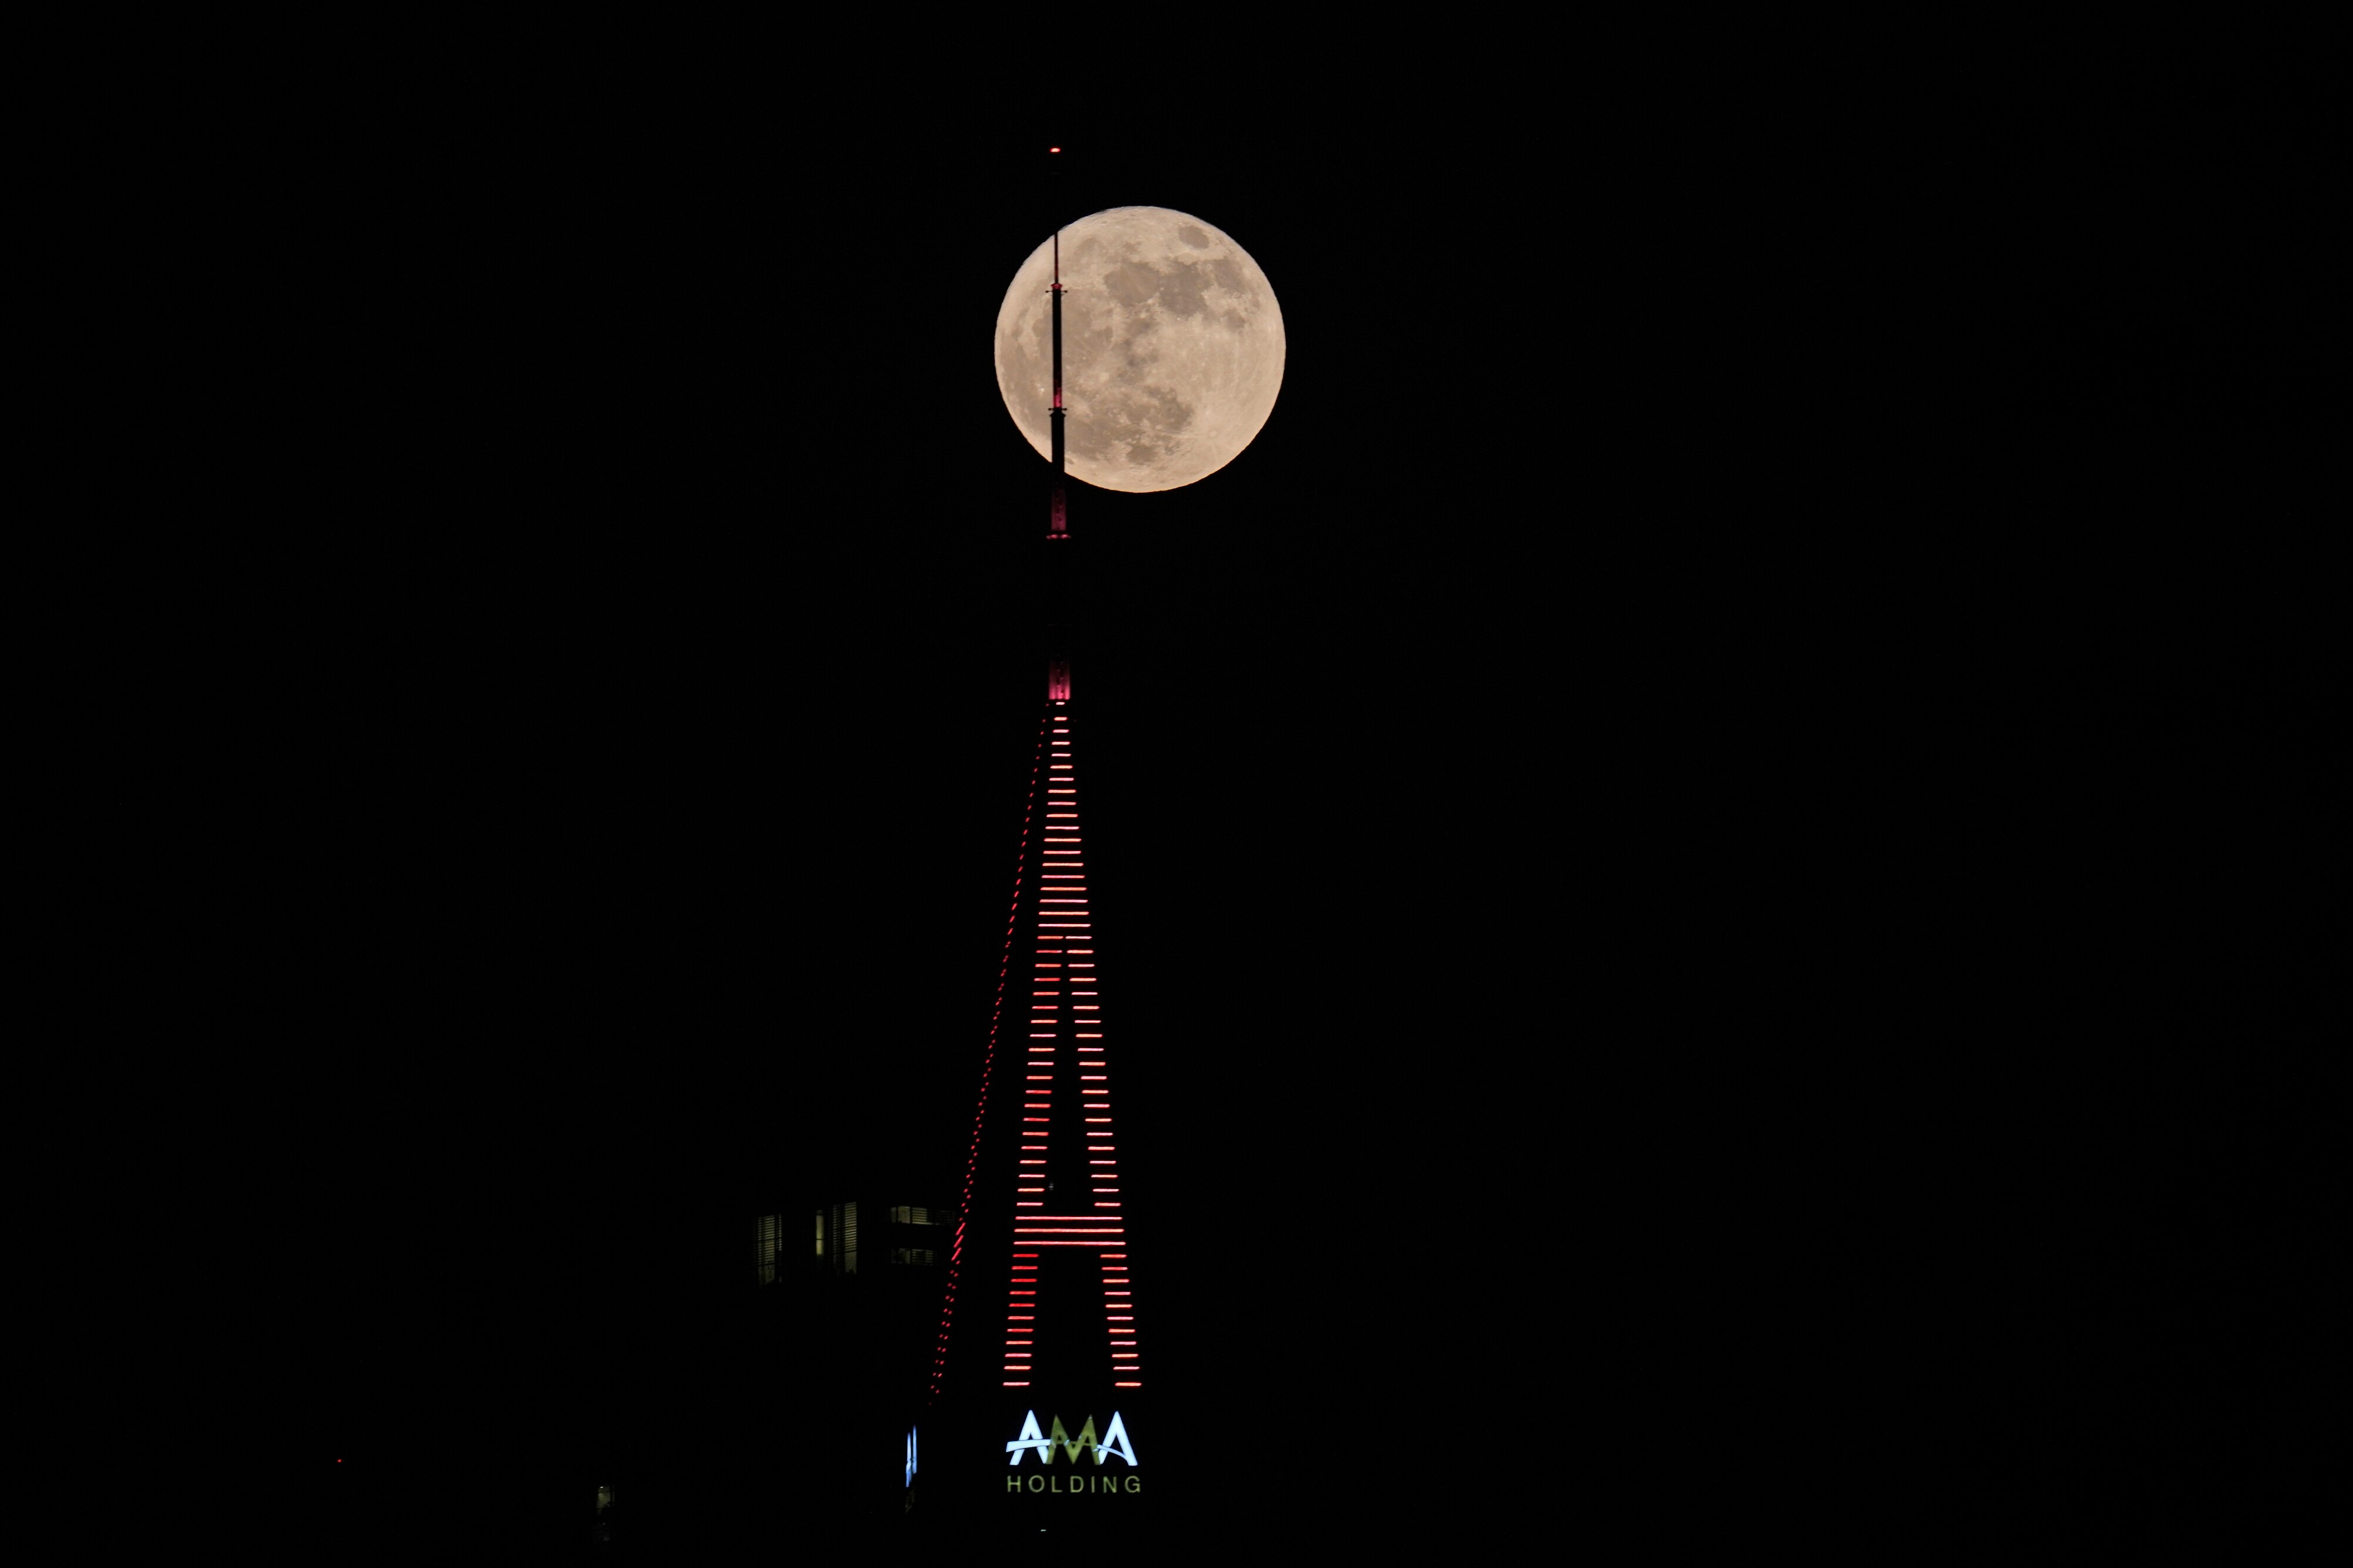 A large moon is seen behind the spire on top of a tall, thin tower lit with horizontal stripes of light.